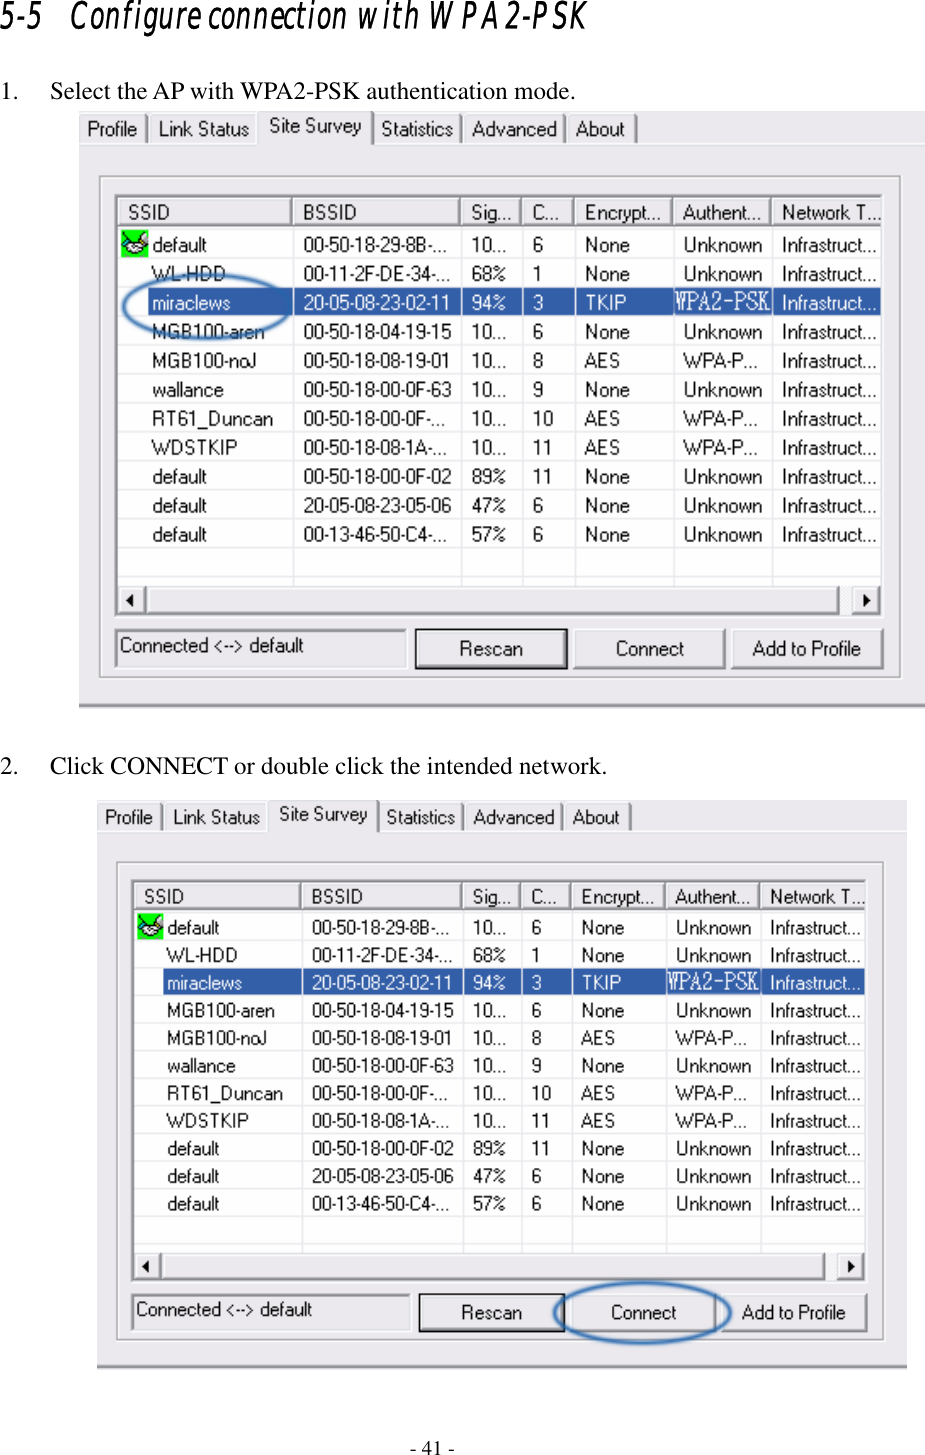    - 41 - 5-5   Configure connection with WPA2-PSK 1. Select the AP with WPA2-PSK authentication mode.   2. Click CONNECT or double click the intended network.  